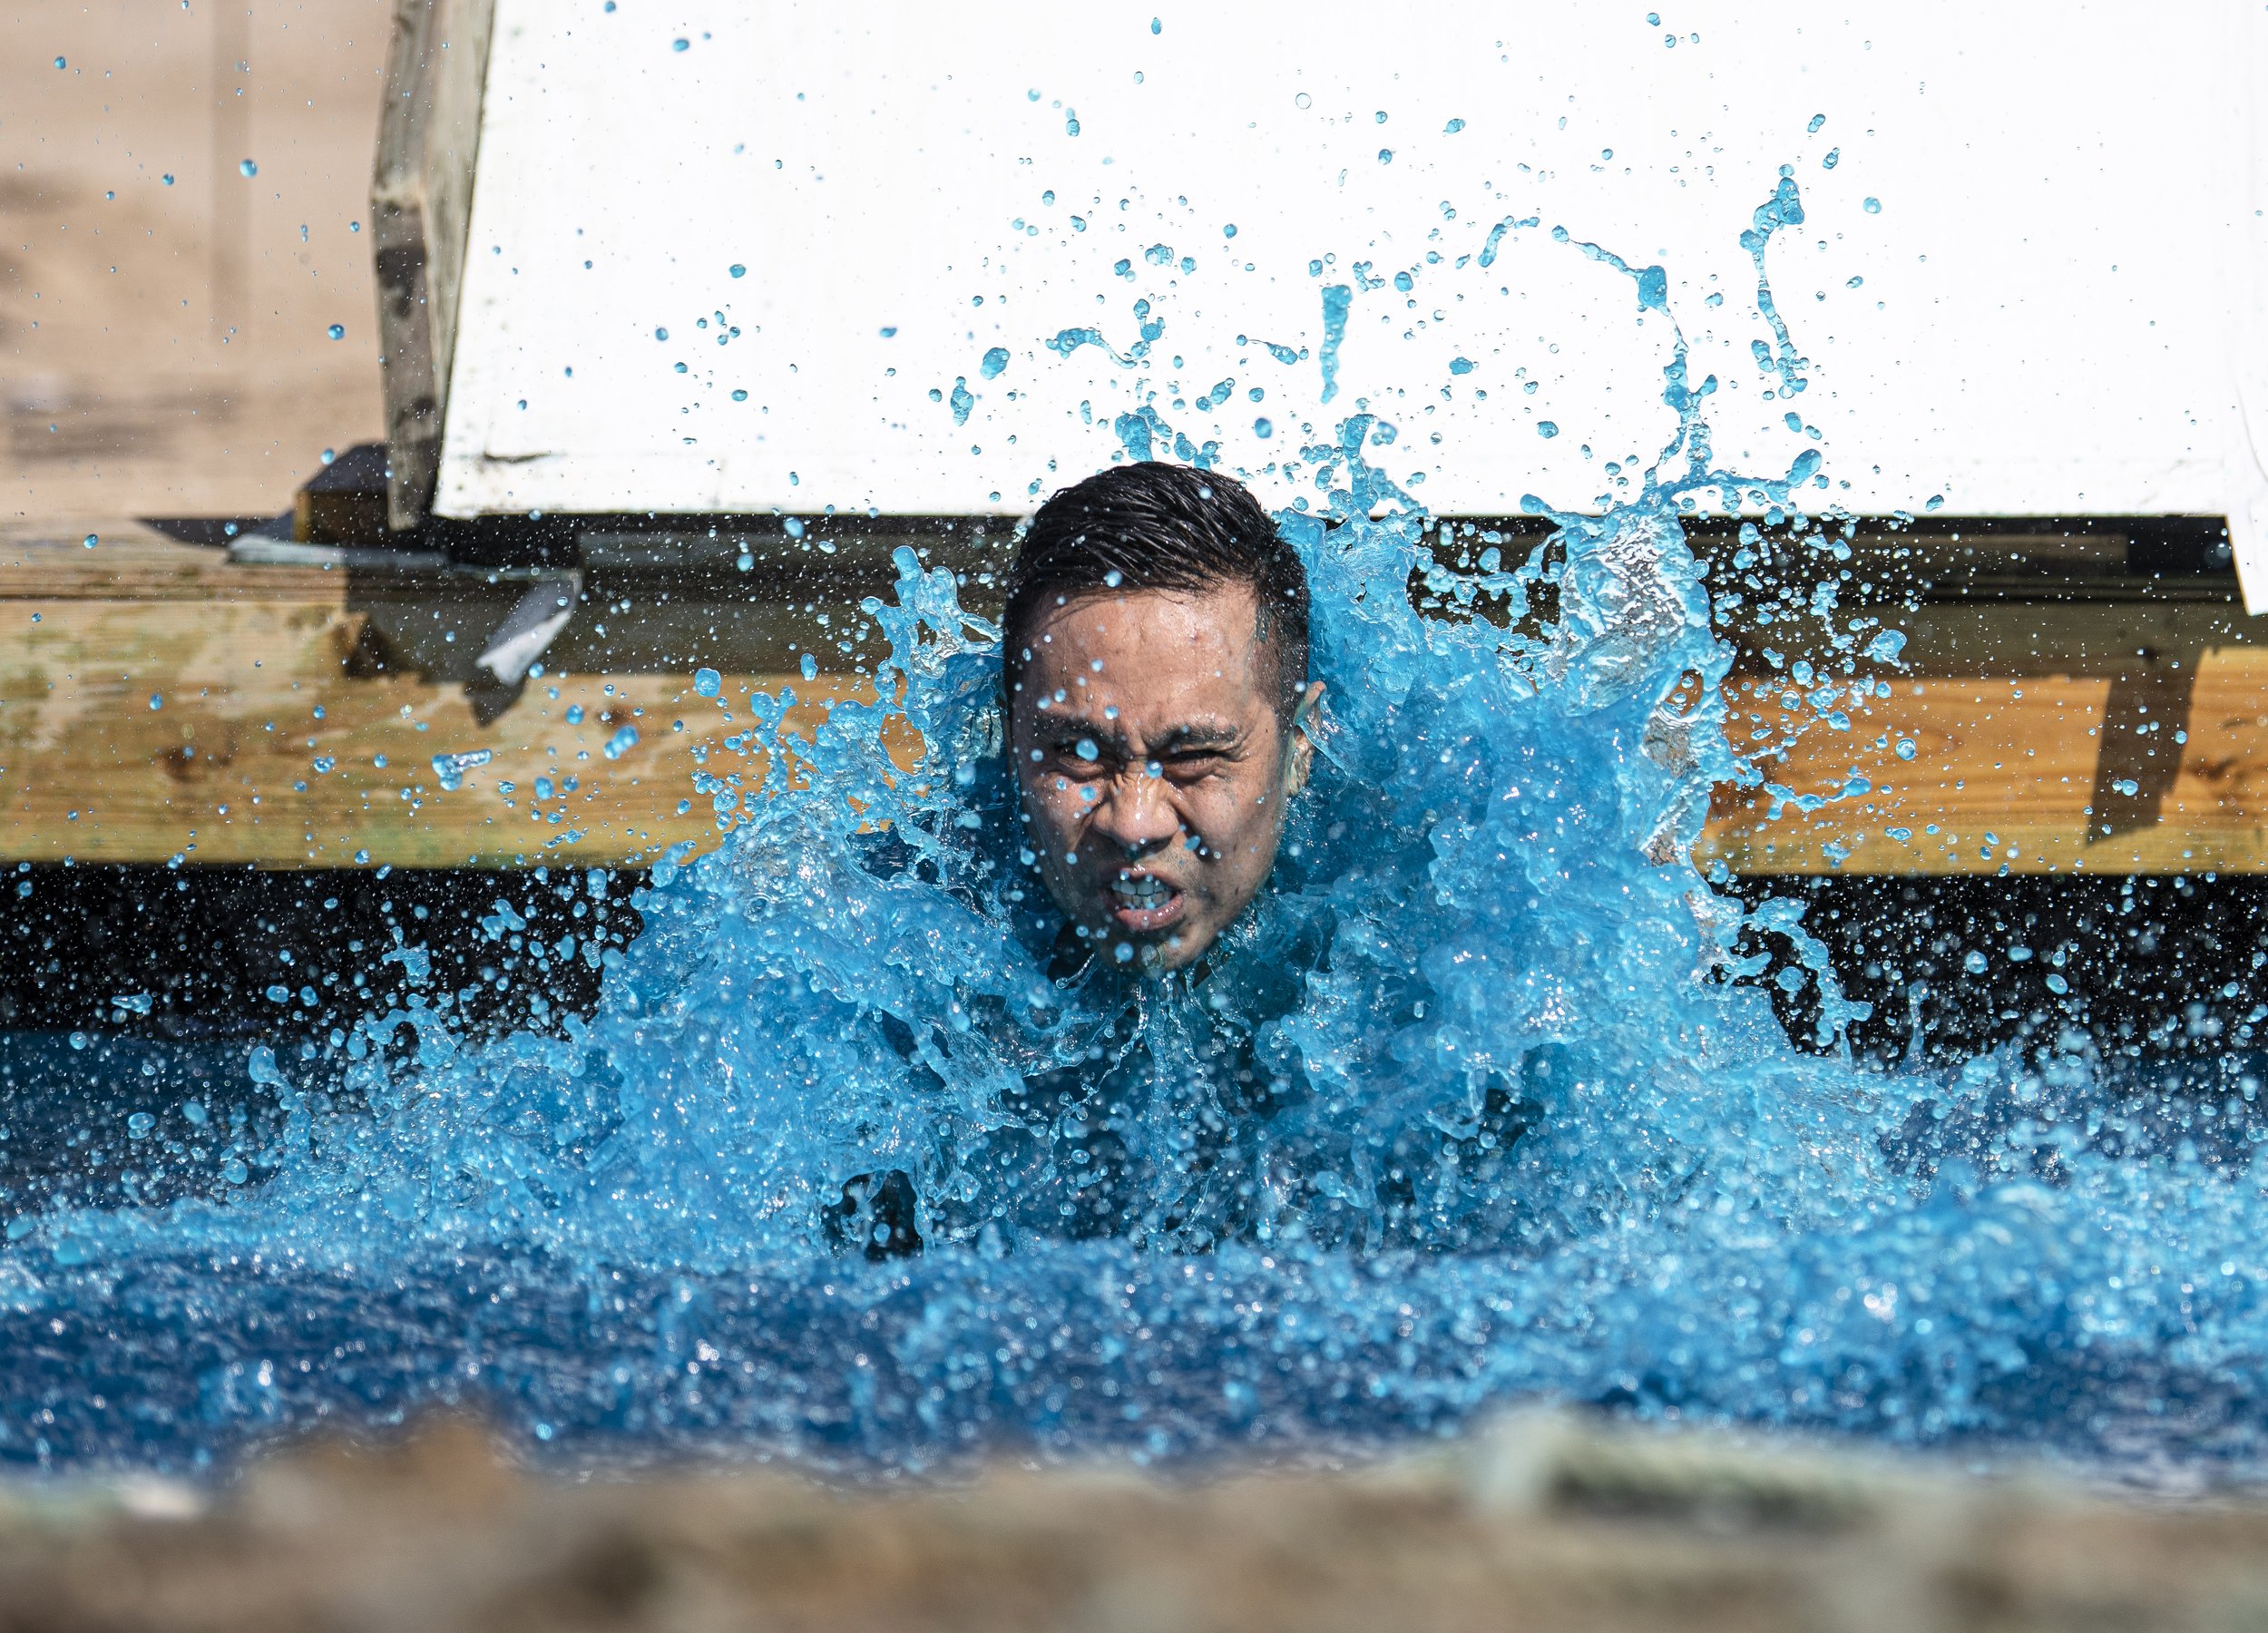  A Tough Mudder Competitor breaks the surface of the water at the Ice Bath obstacle at the Tough Mudder event held in San Bernadino on April 9, 2022. (Jon Putman | The Corsair) 